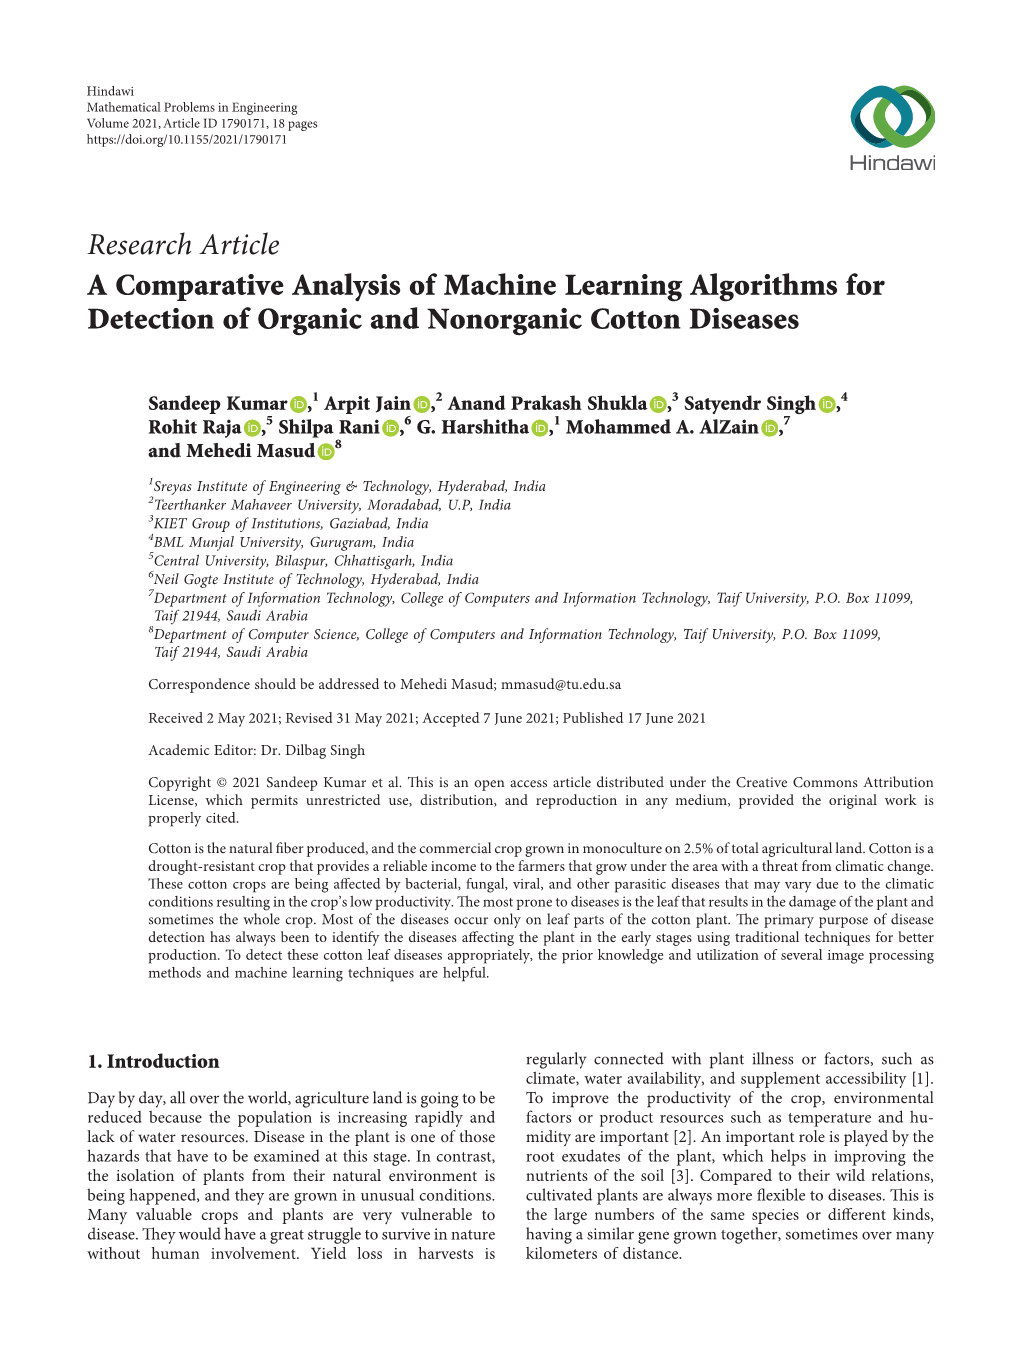 A Comparative Analysis of Machine Learning Algorithms for Detection of Organic and Nonorganic Cotton Diseases